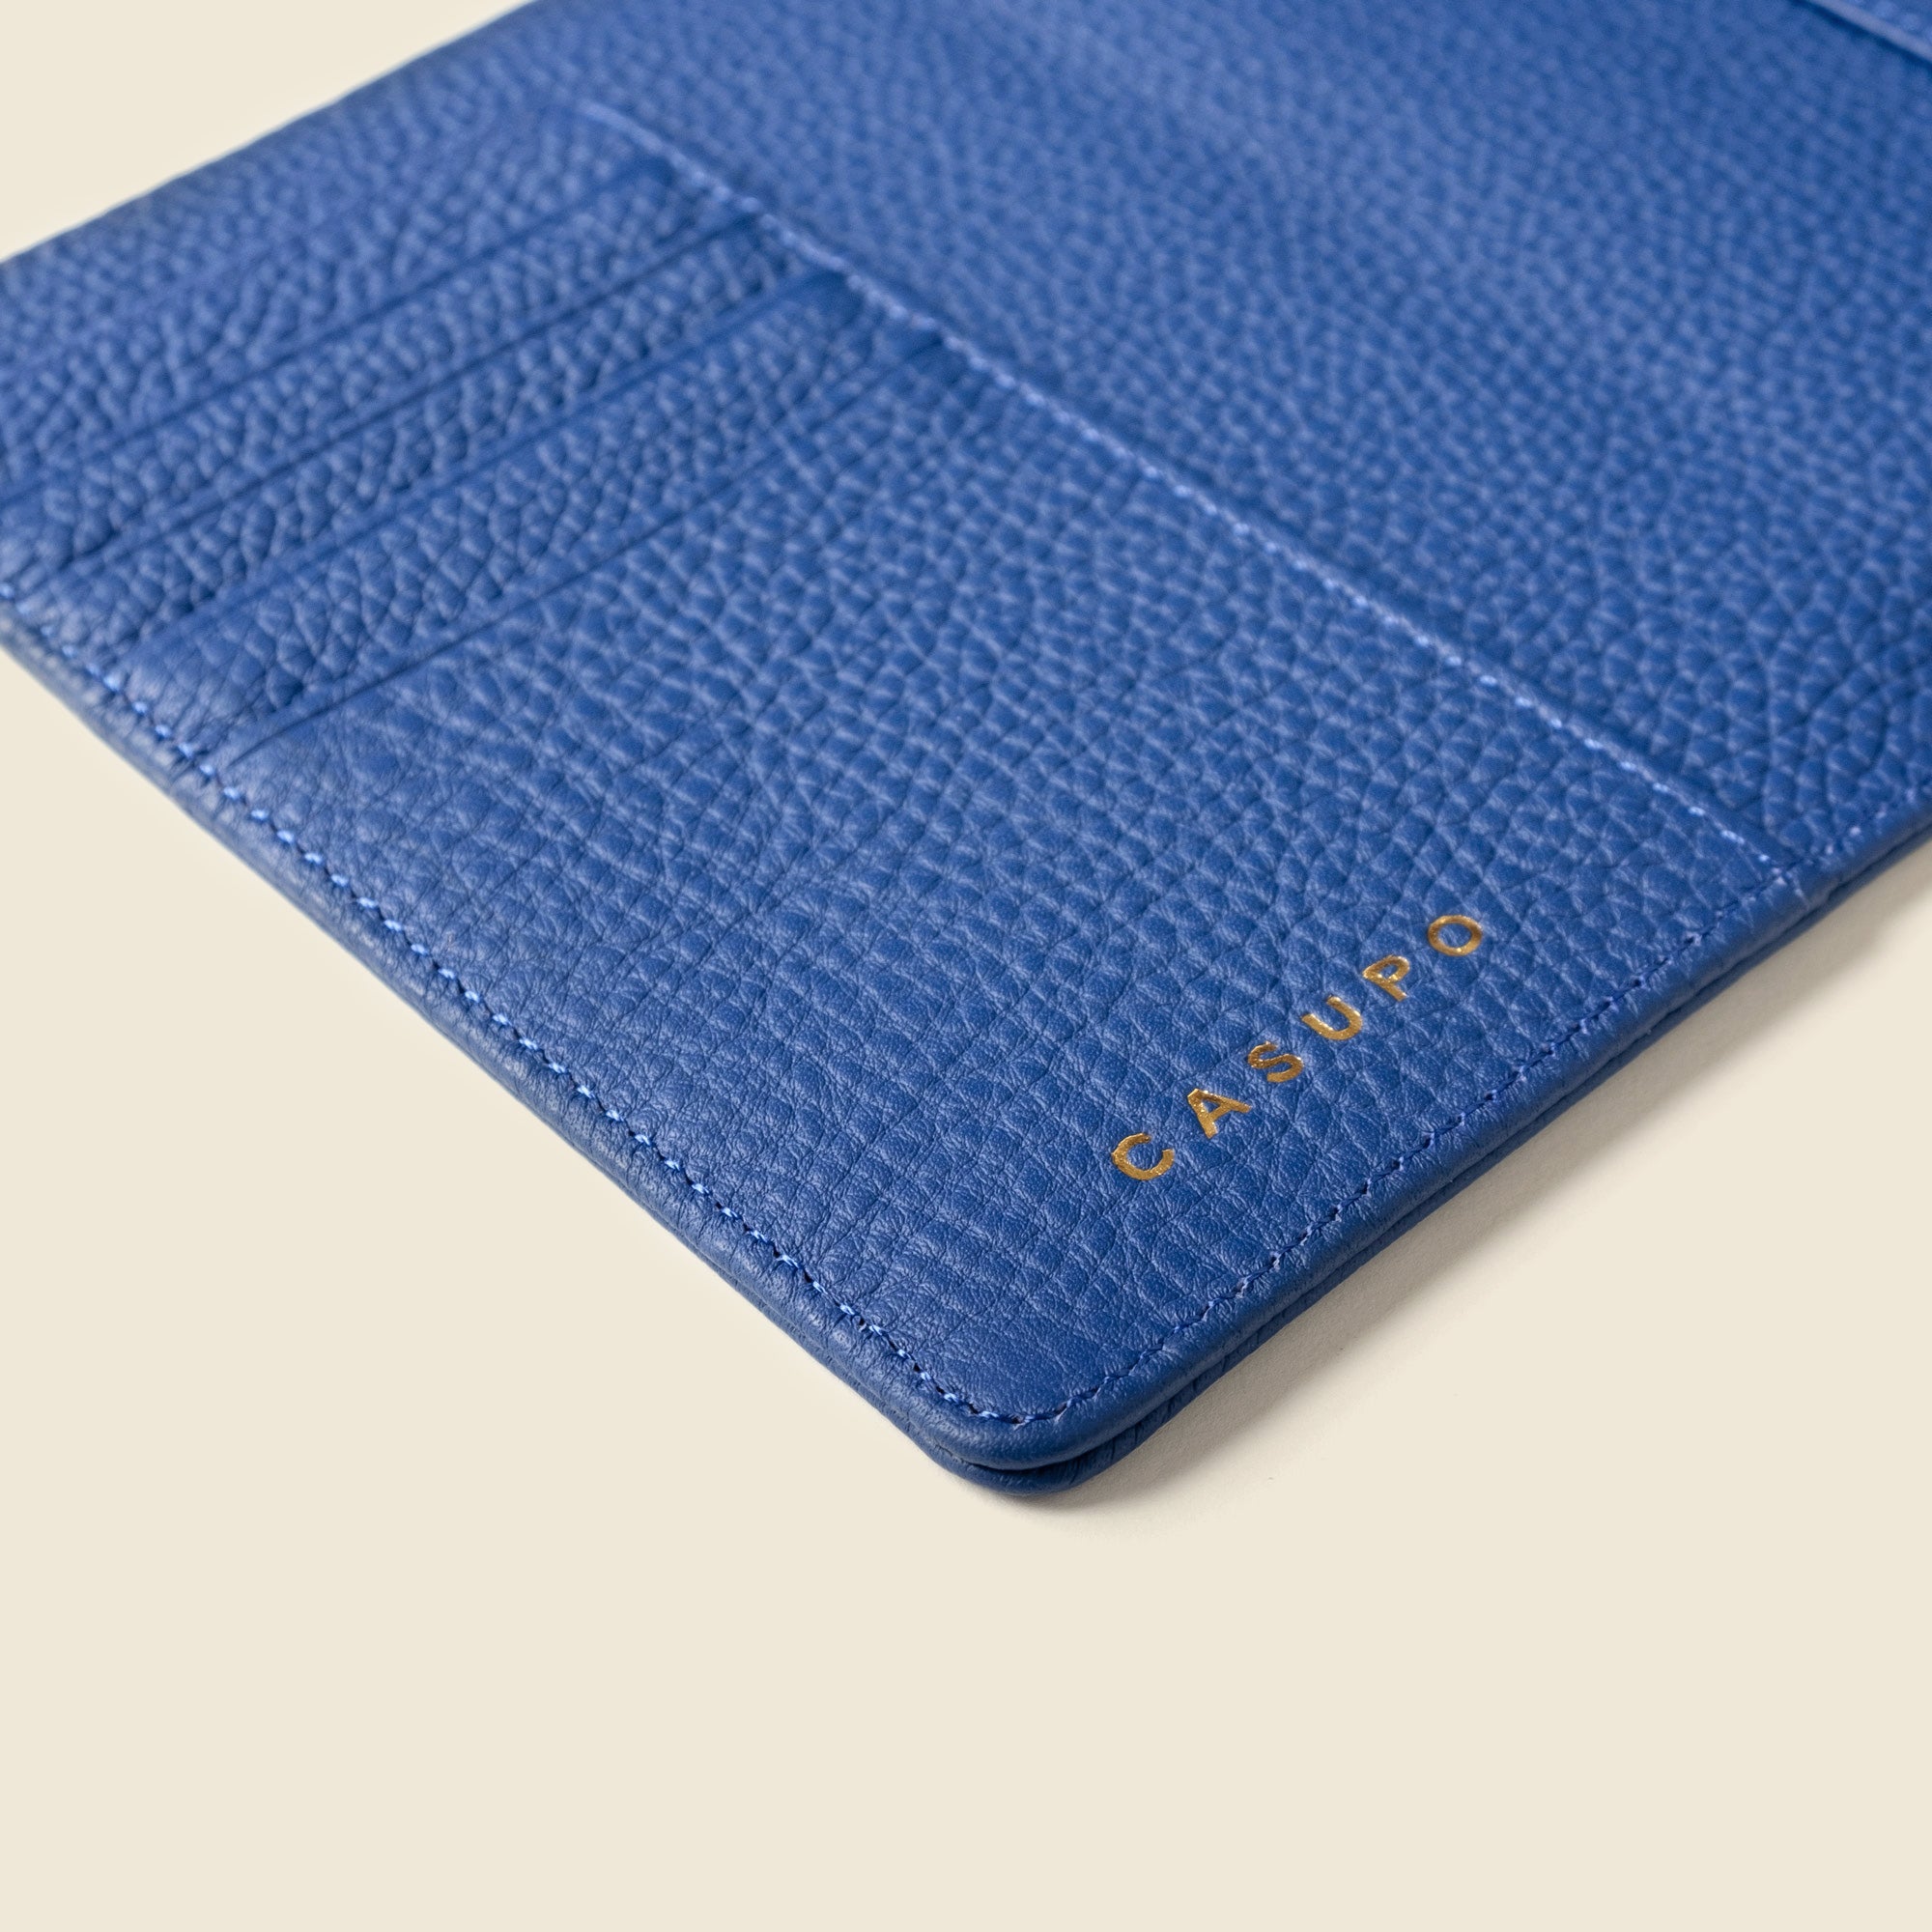 Blue leather passport Wallet with RFID